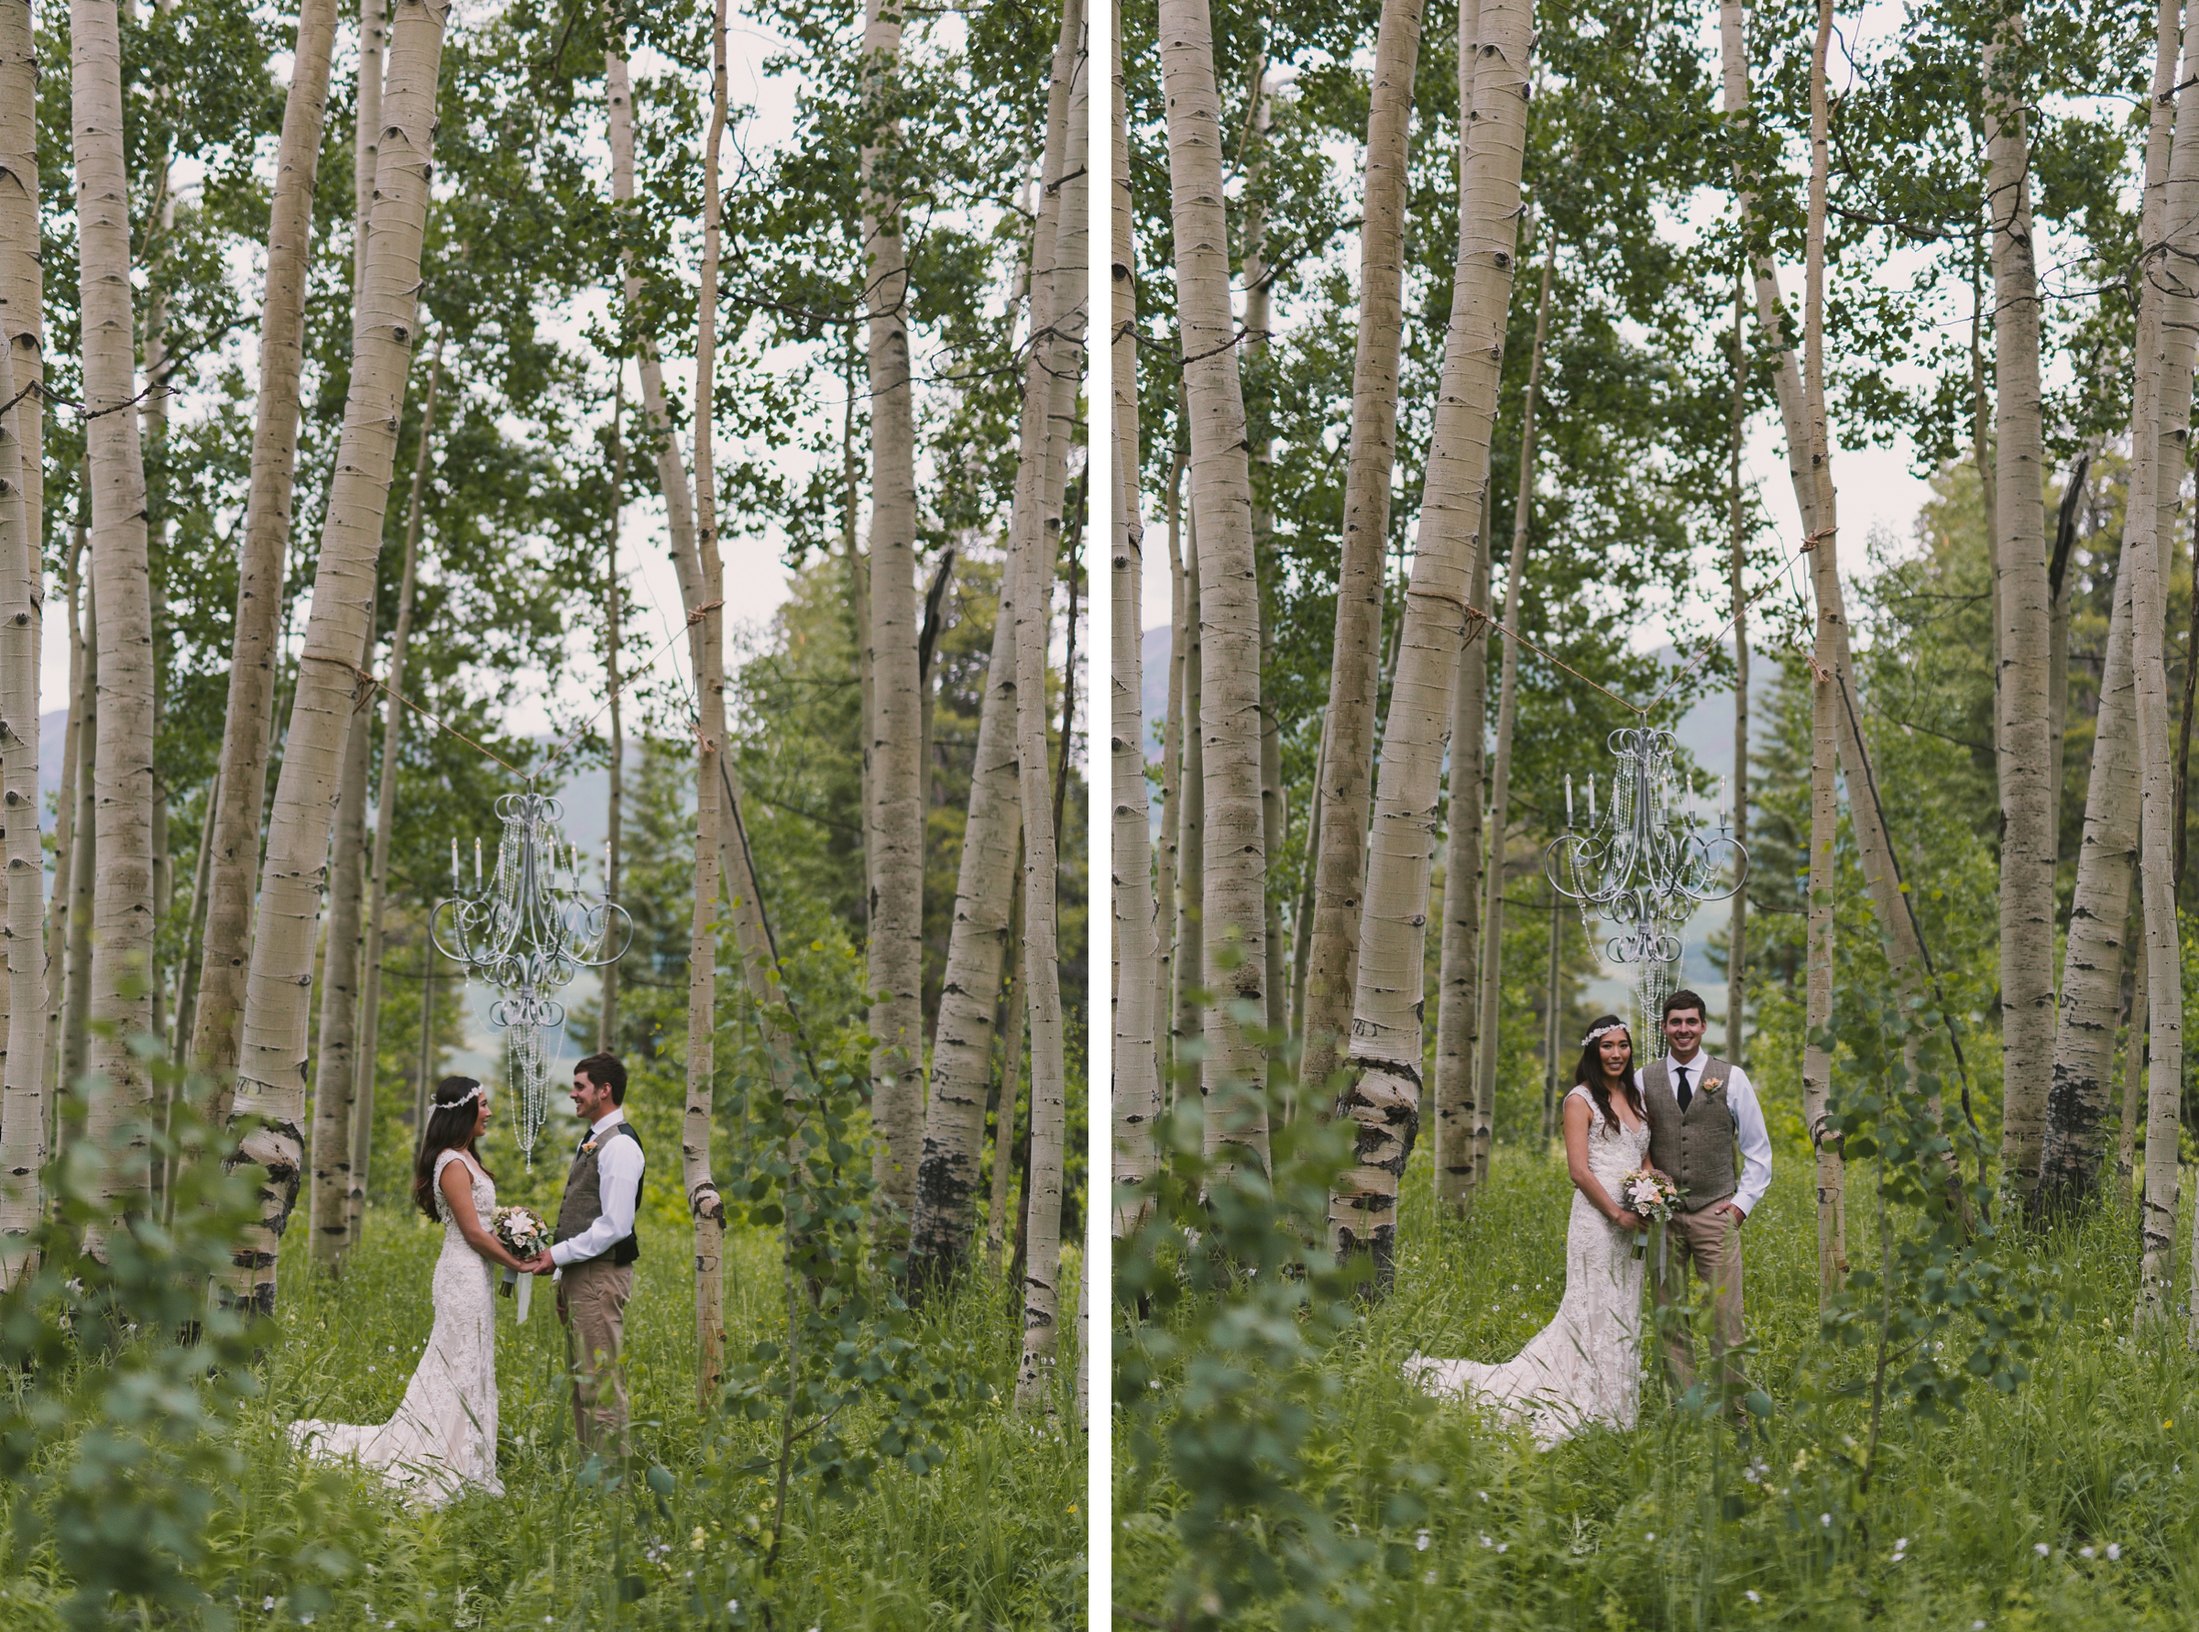 Bride and groom in aspen trees with chandelier